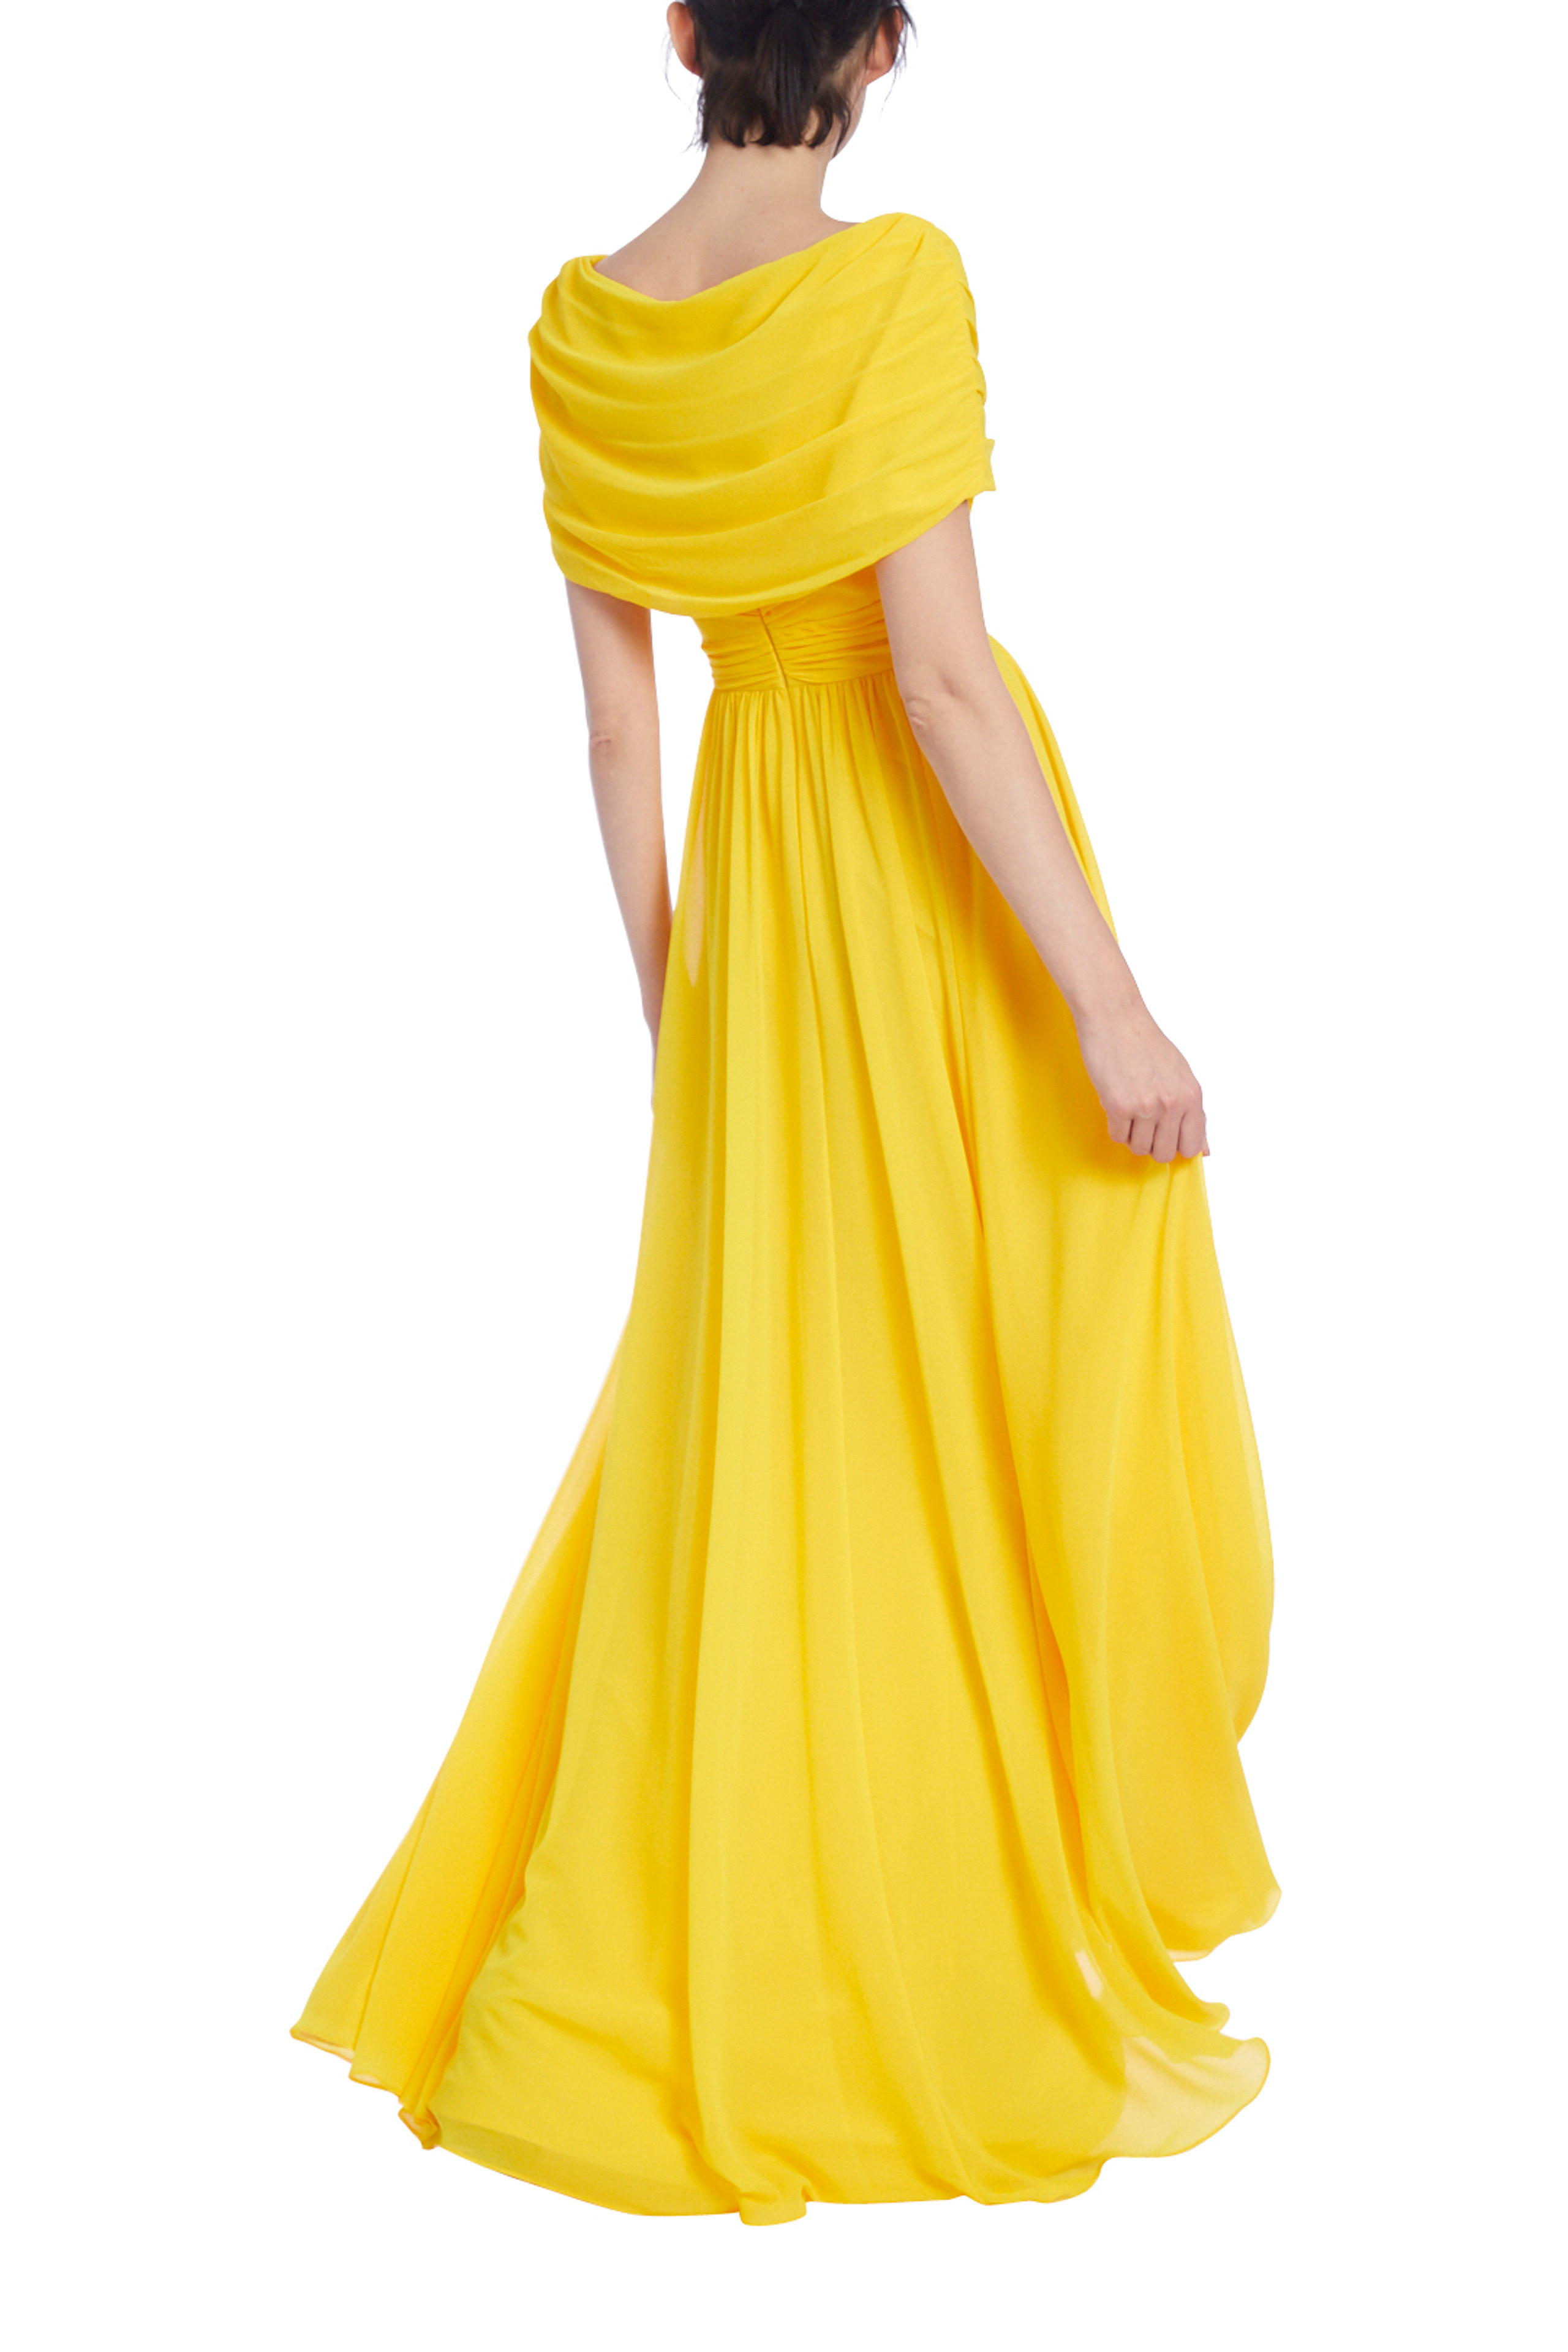 Lemon-Yellow Pleated Evening Gown with Ruched Bodice by Badgley Mischka